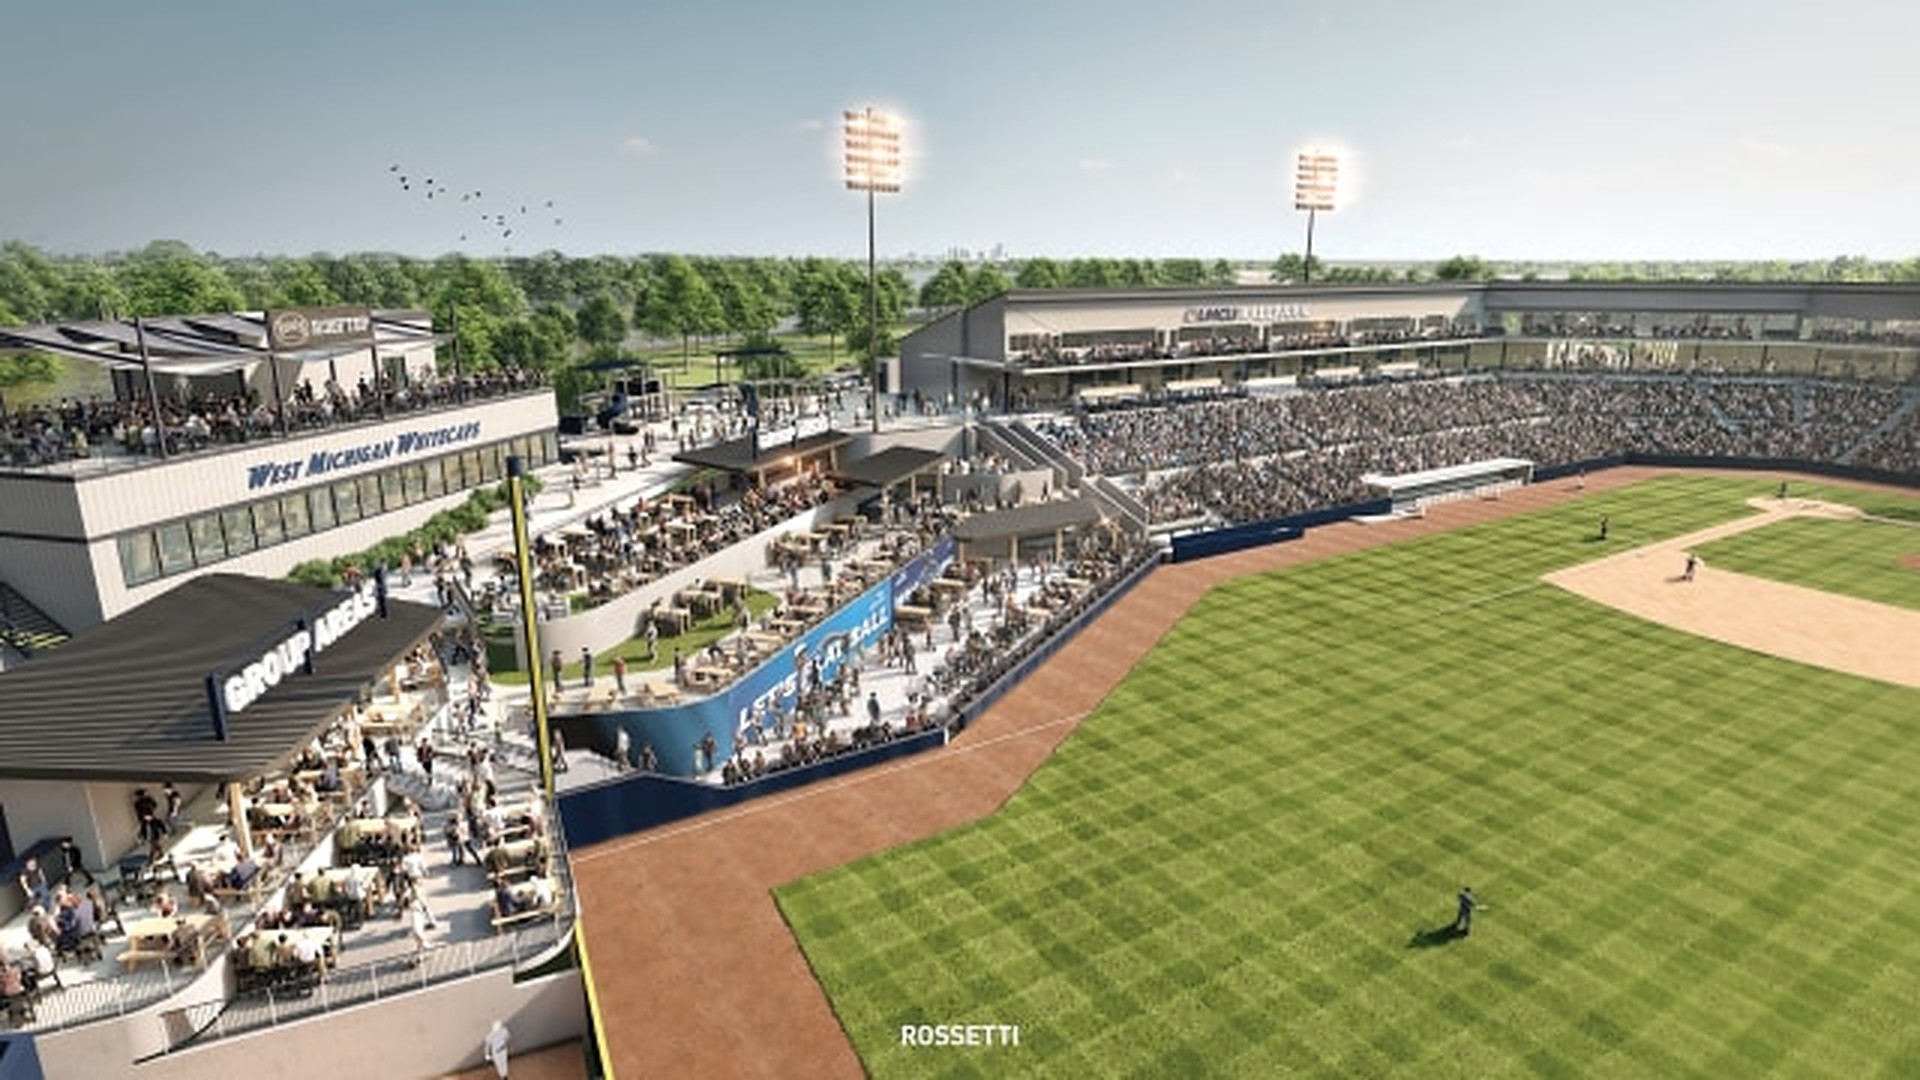 The Whitecaps are embarking upon a multi-phase modernization project at LMCU Ballpark that will add many amenities.